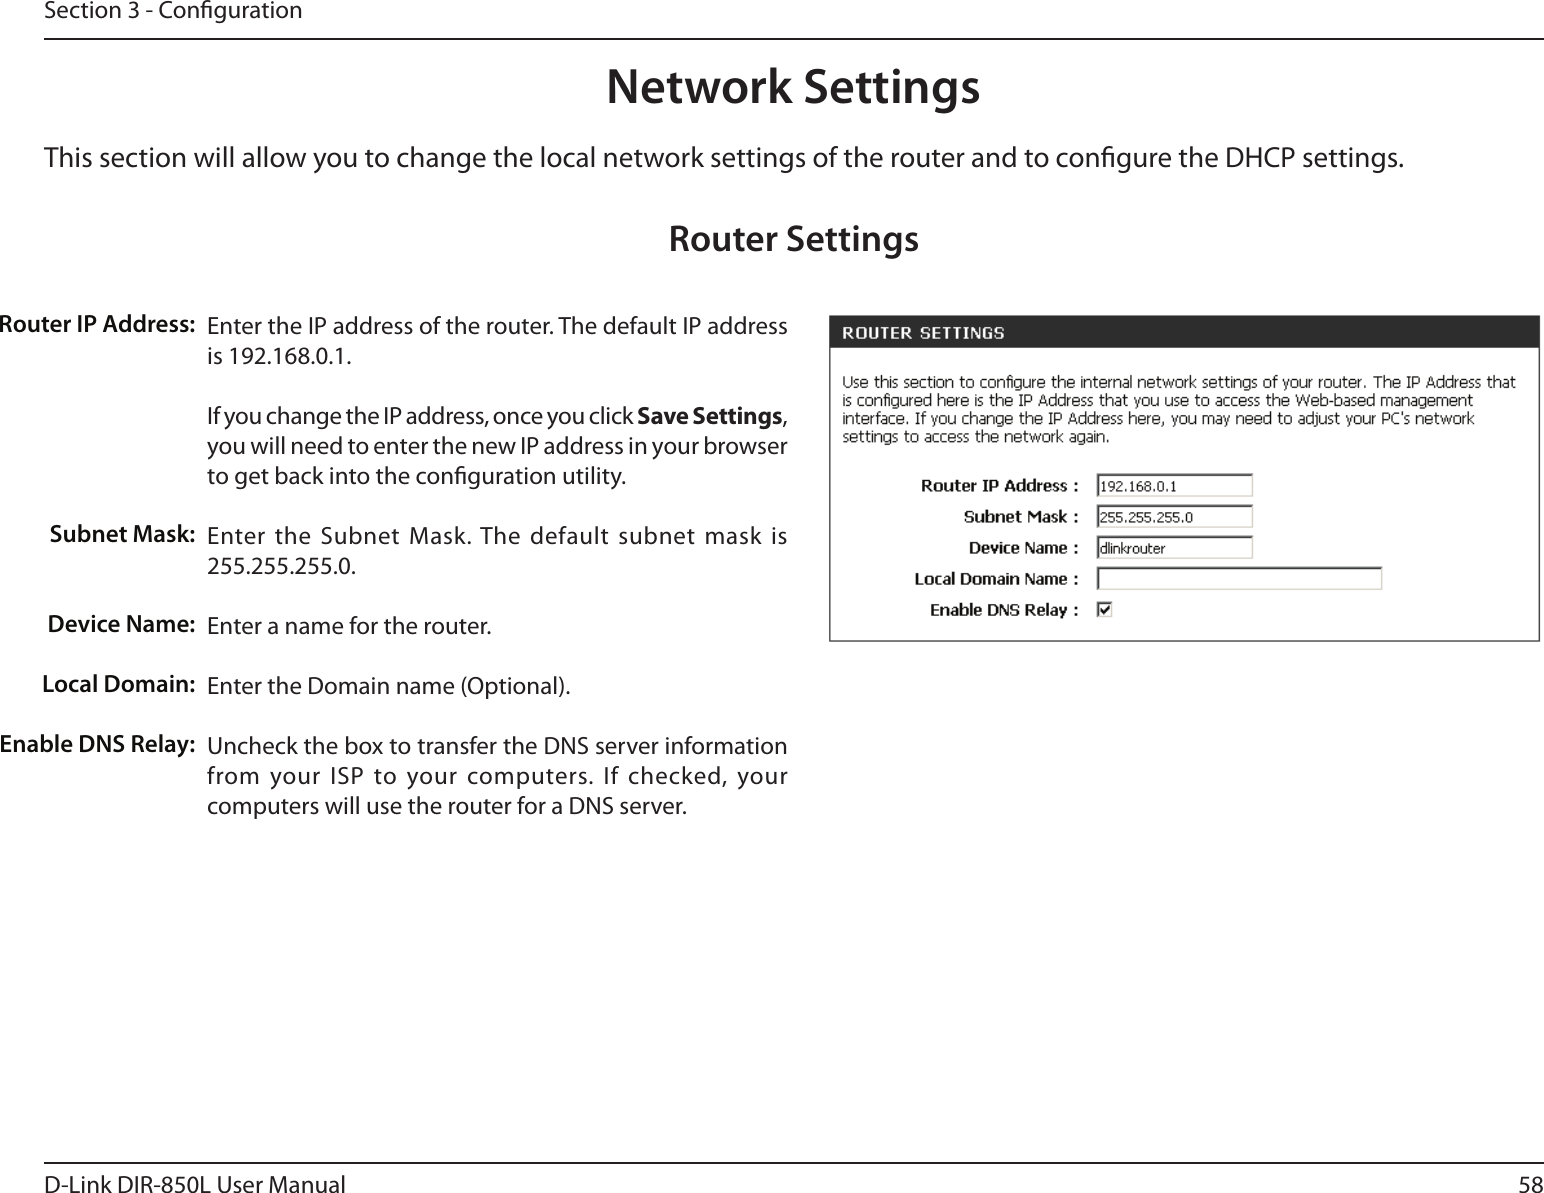 58D-Link DIR-850L User ManualSection 3 - CongurationThis section will allow you to change the local network settings of the router and to congure the DHCP settings.Network SettingsEnter the IP address of the router. The default IP address is 192.168.0.1.If you change the IP address, once you click Save Settings, you will need to enter the new IP address in your browser to get back into the conguration utility.Enter the Subnet  Mask. The default  subnet mask is 255.255.255.0.Enter a name for the router.Enter the Domain name (Optional).Uncheck the box to transfer the DNS server information from your ISP to your computers. If checked, your computers will use the router for a DNS server.Router IP Address:Subnet Mask:Device Name:Local Domain:Enable DNS Relay:Router Settings